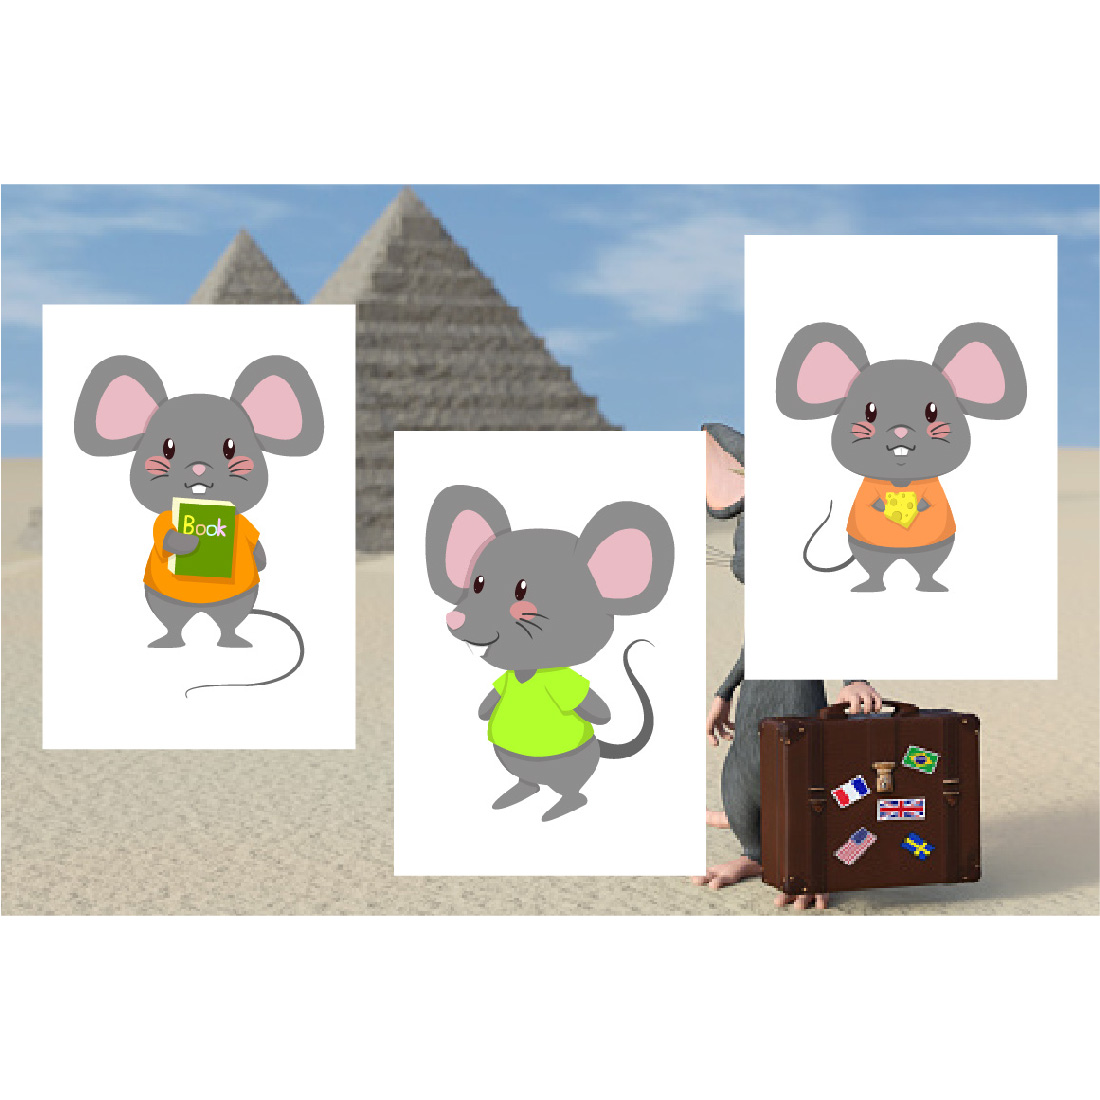 Cute Mouse Vector Cartoon Sticker with Photo of the Rat on Background.